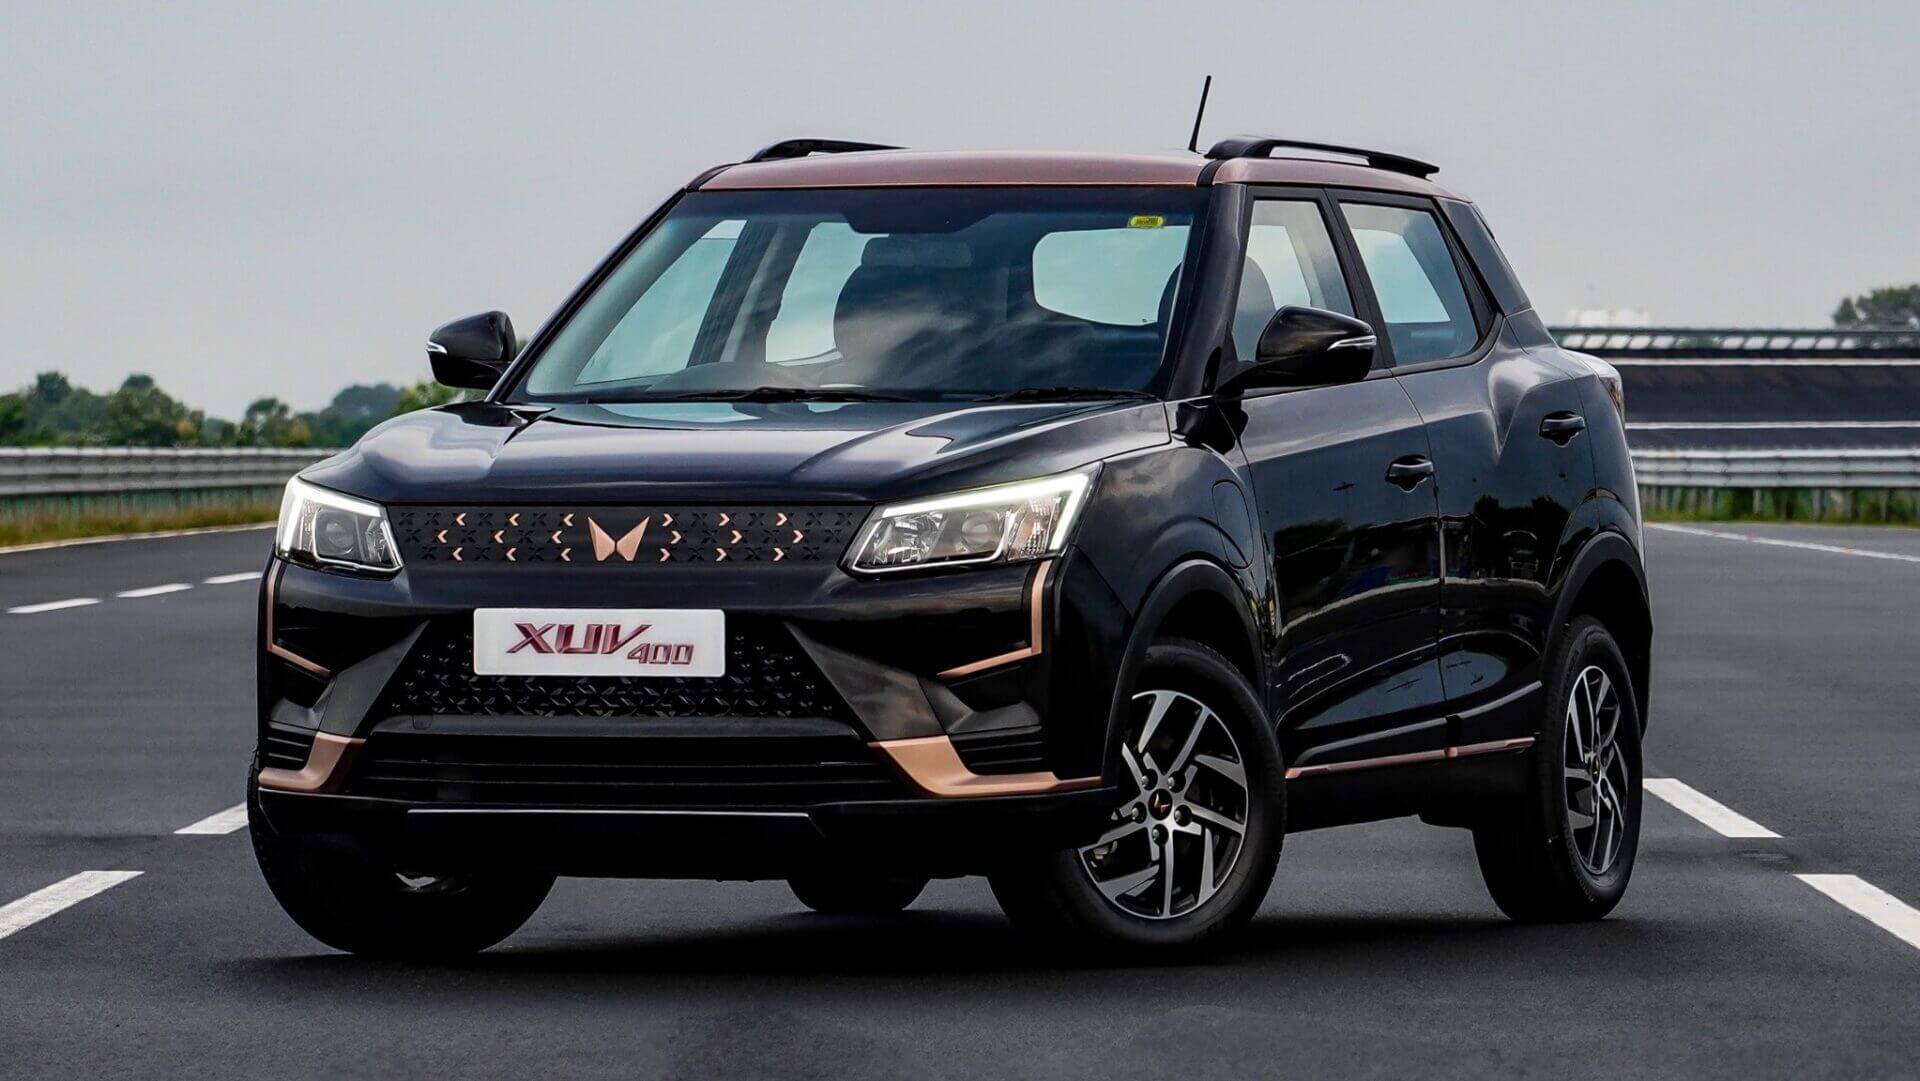 Mahindra XUV400 Electric SUV to Debut in Nepal This Week!